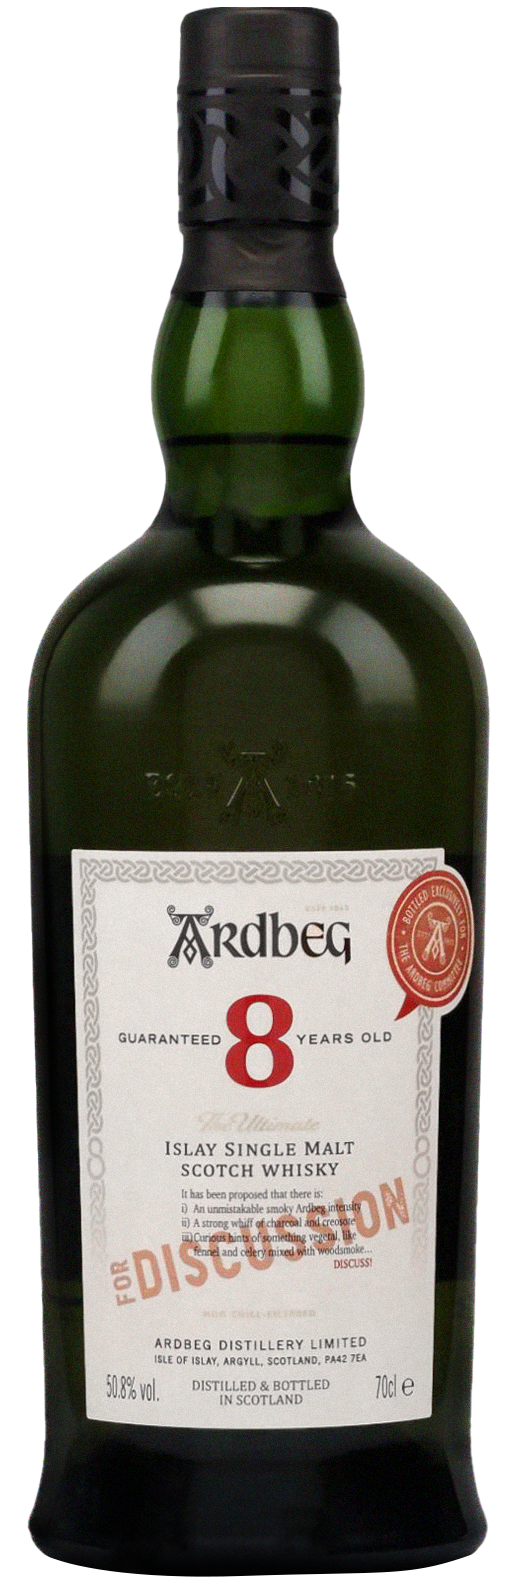 Ardbeg 8 Year Old 'For Discussion' Committee Release Single Malt Scotch Whisky, 50.8% ABV 700ml